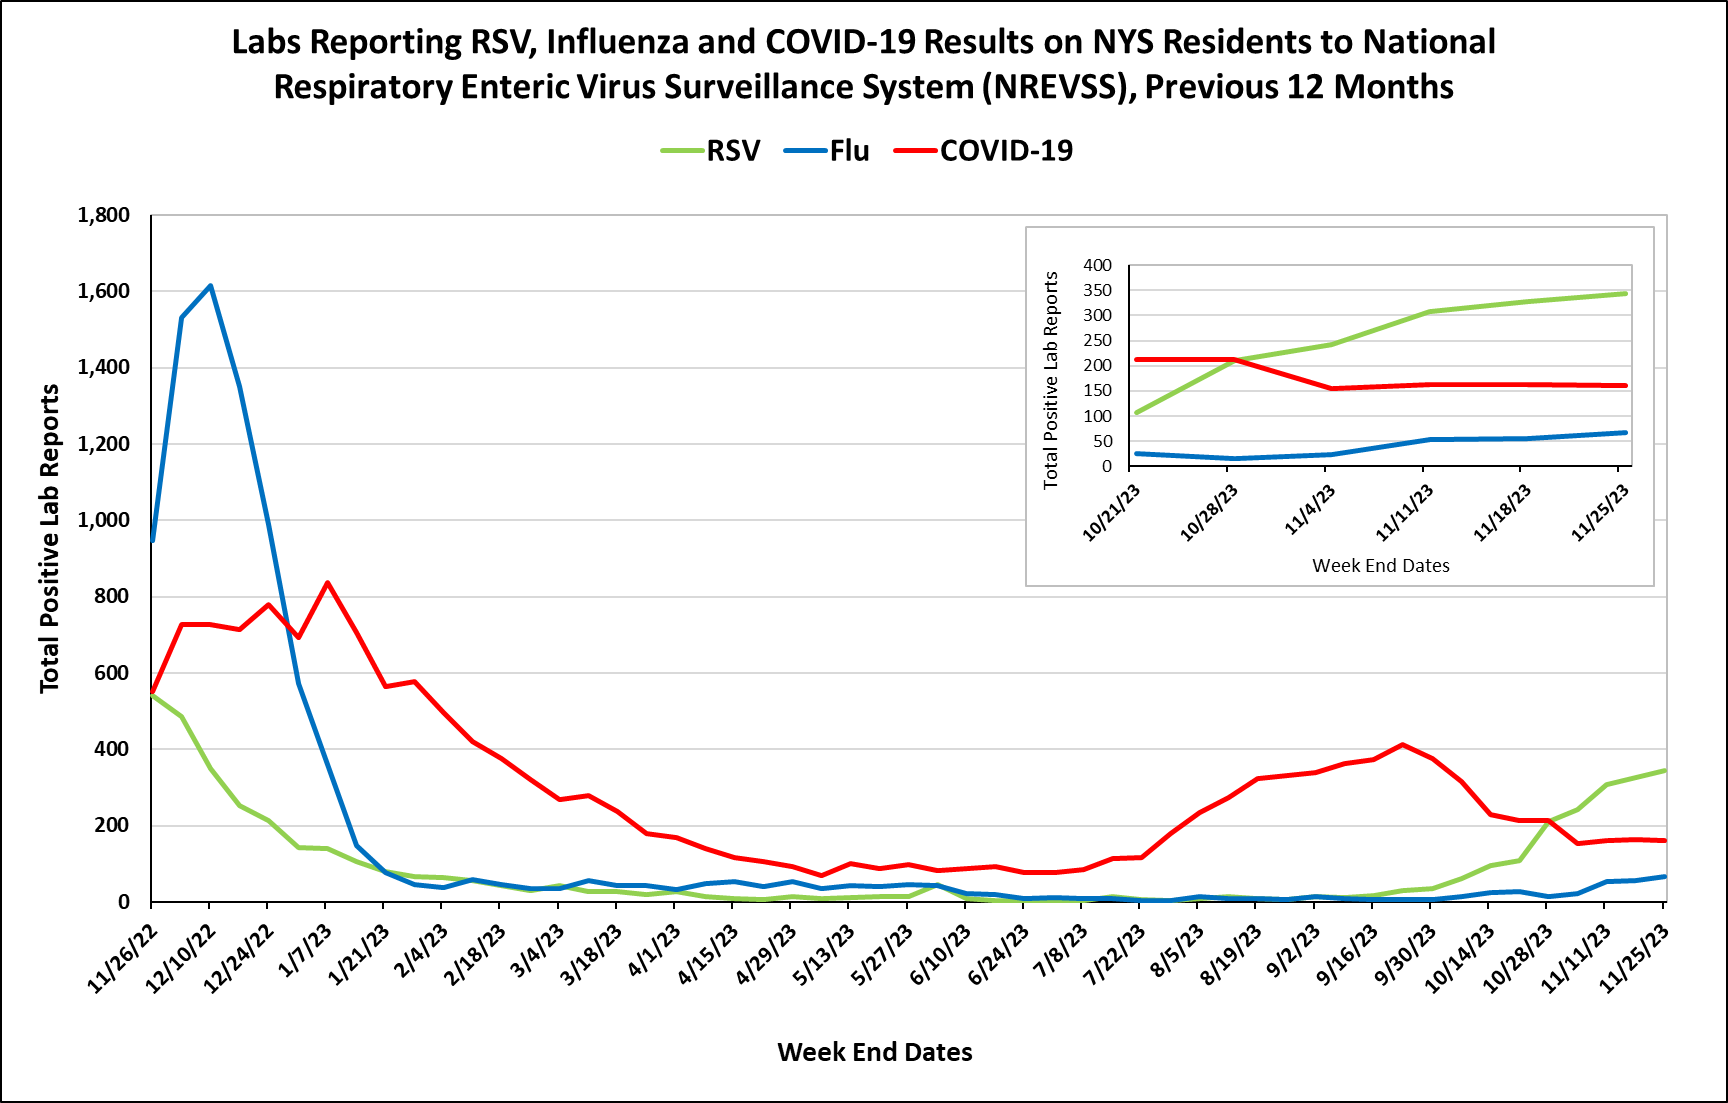 Chart showing cases of RSV, Flu, and COVID-19 over the last 12 months